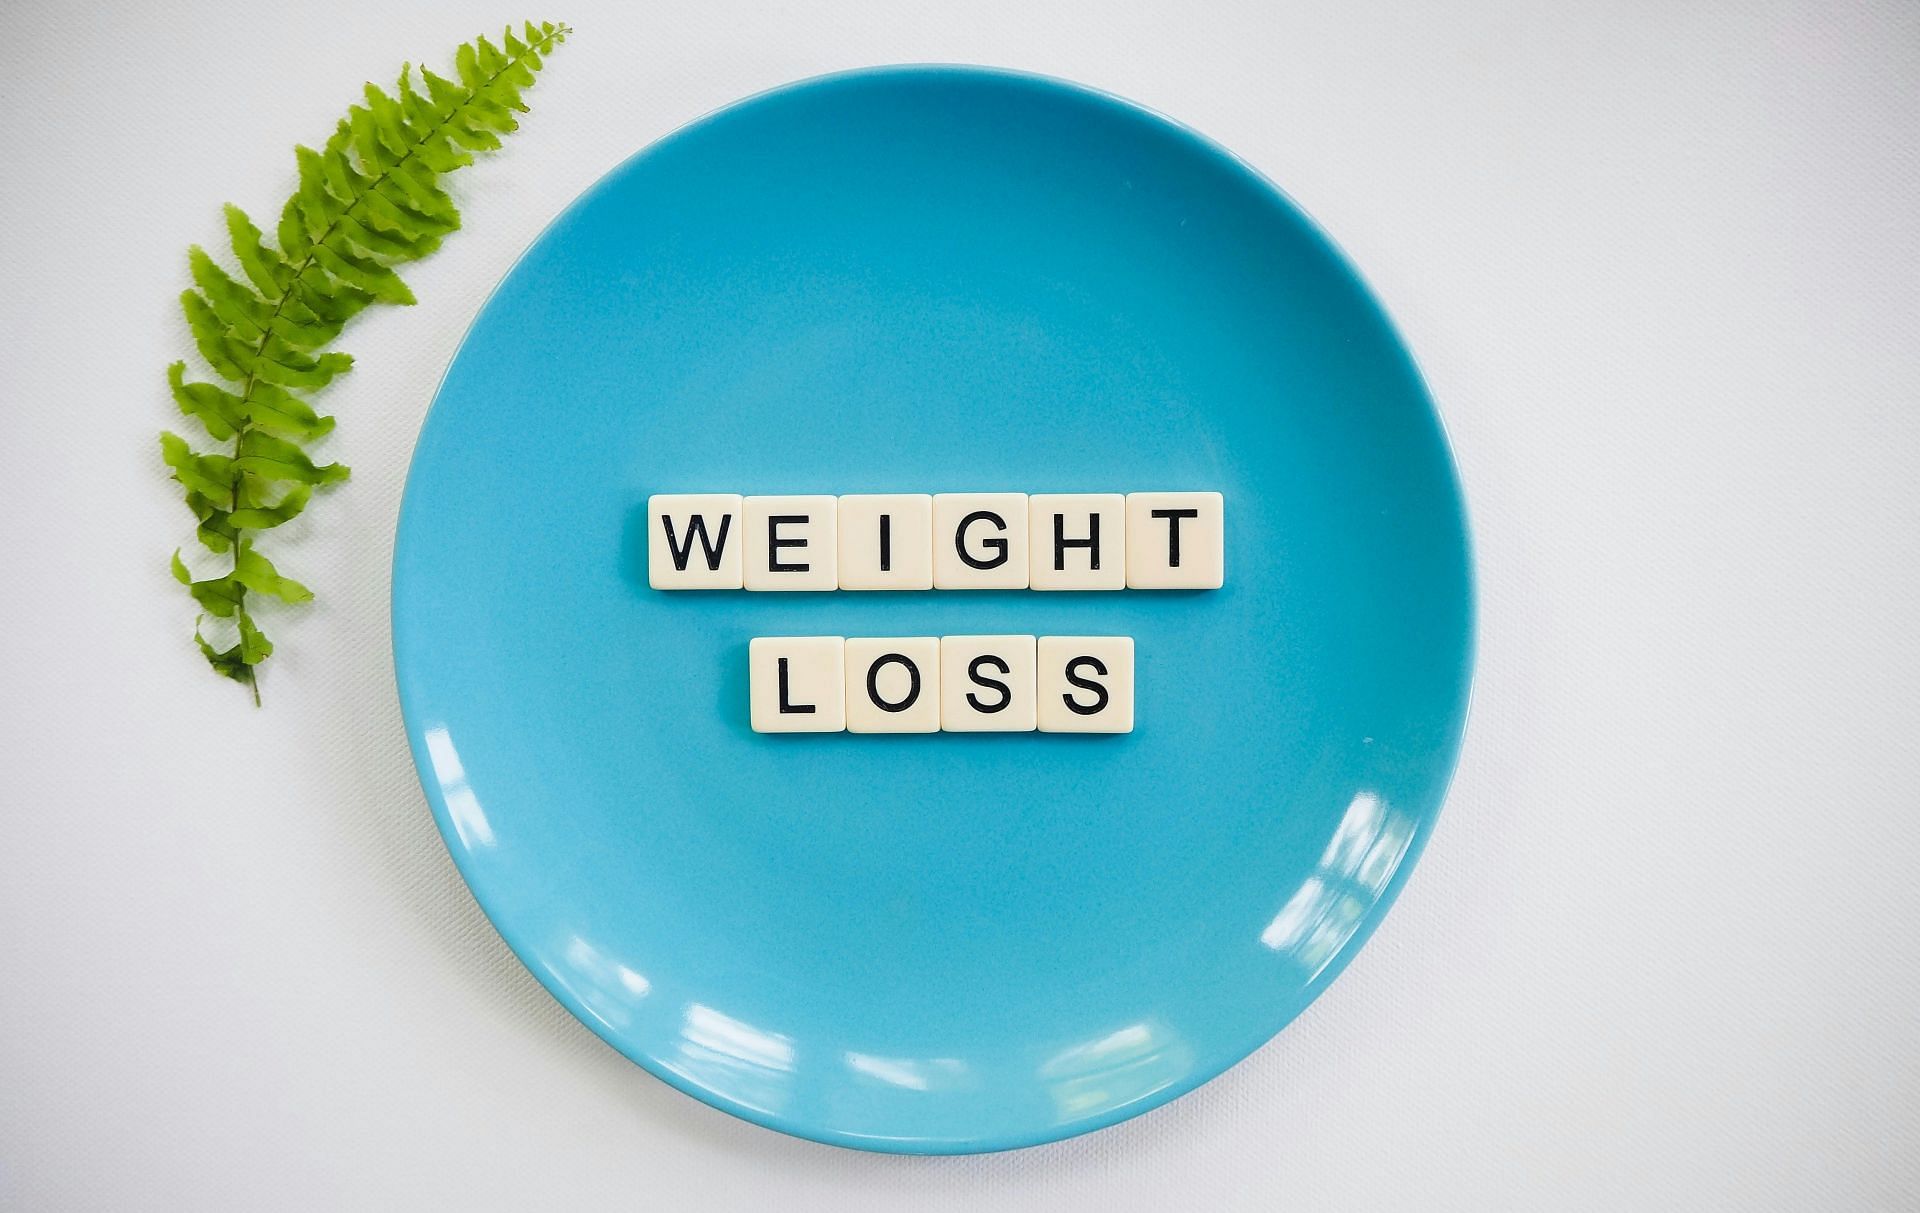 Lose weight with the A2 milk benefits (Image by Total Shape/Unsplash)